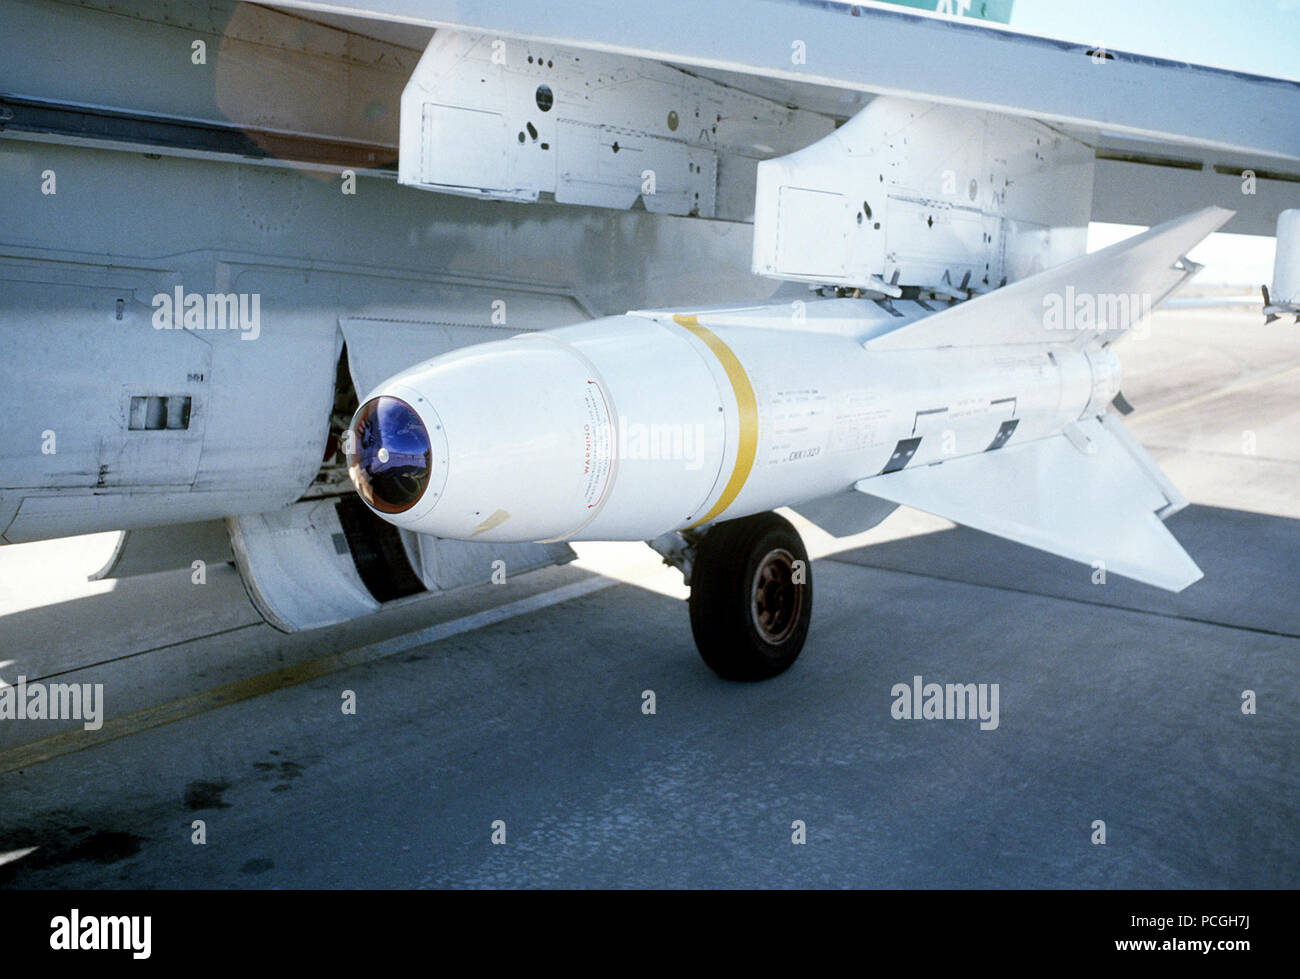 An AGM-62 Walleye glide bomb mounted on the wing pylon of an A-7 Corsair II aircraft at White Sands Missile Range. Stock Photo